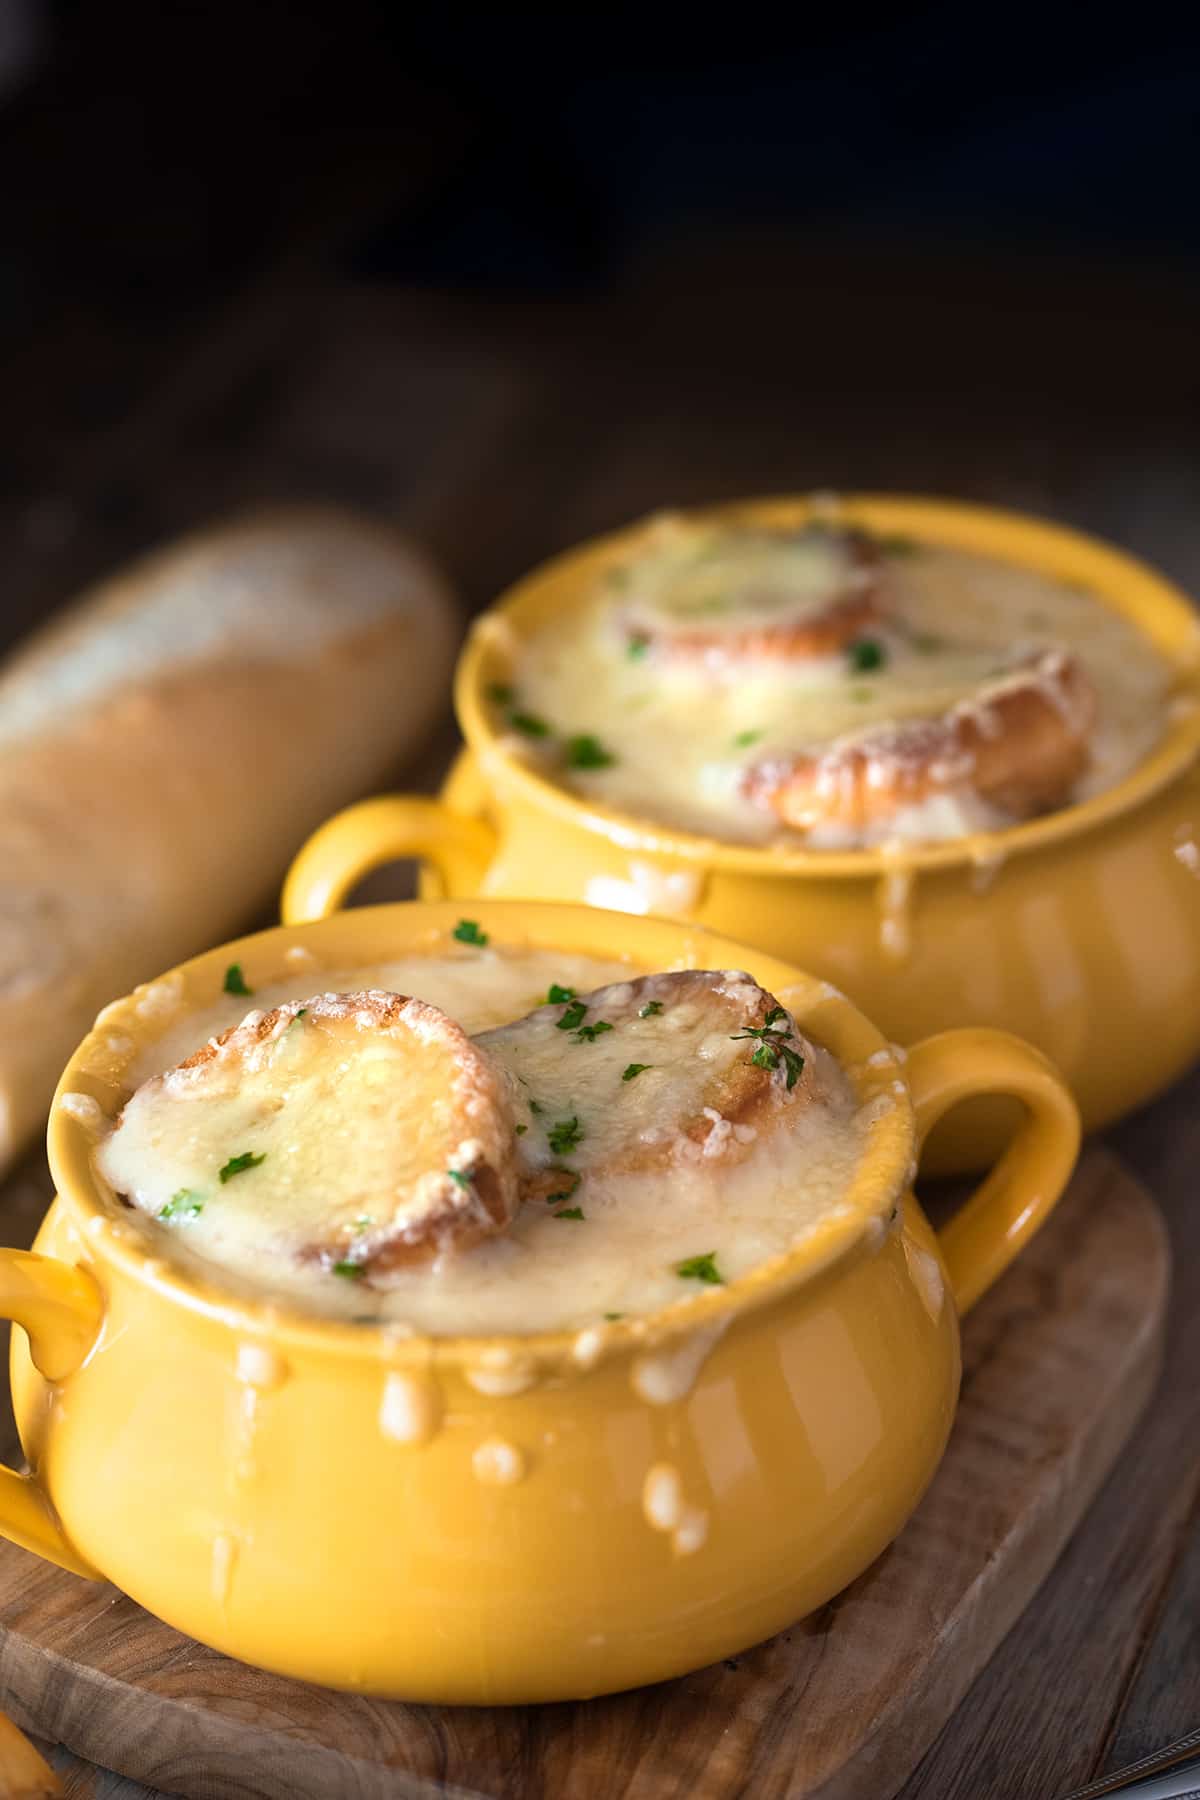 Two bowls of French onion soup with croutons and melted Swiss cheese on top.